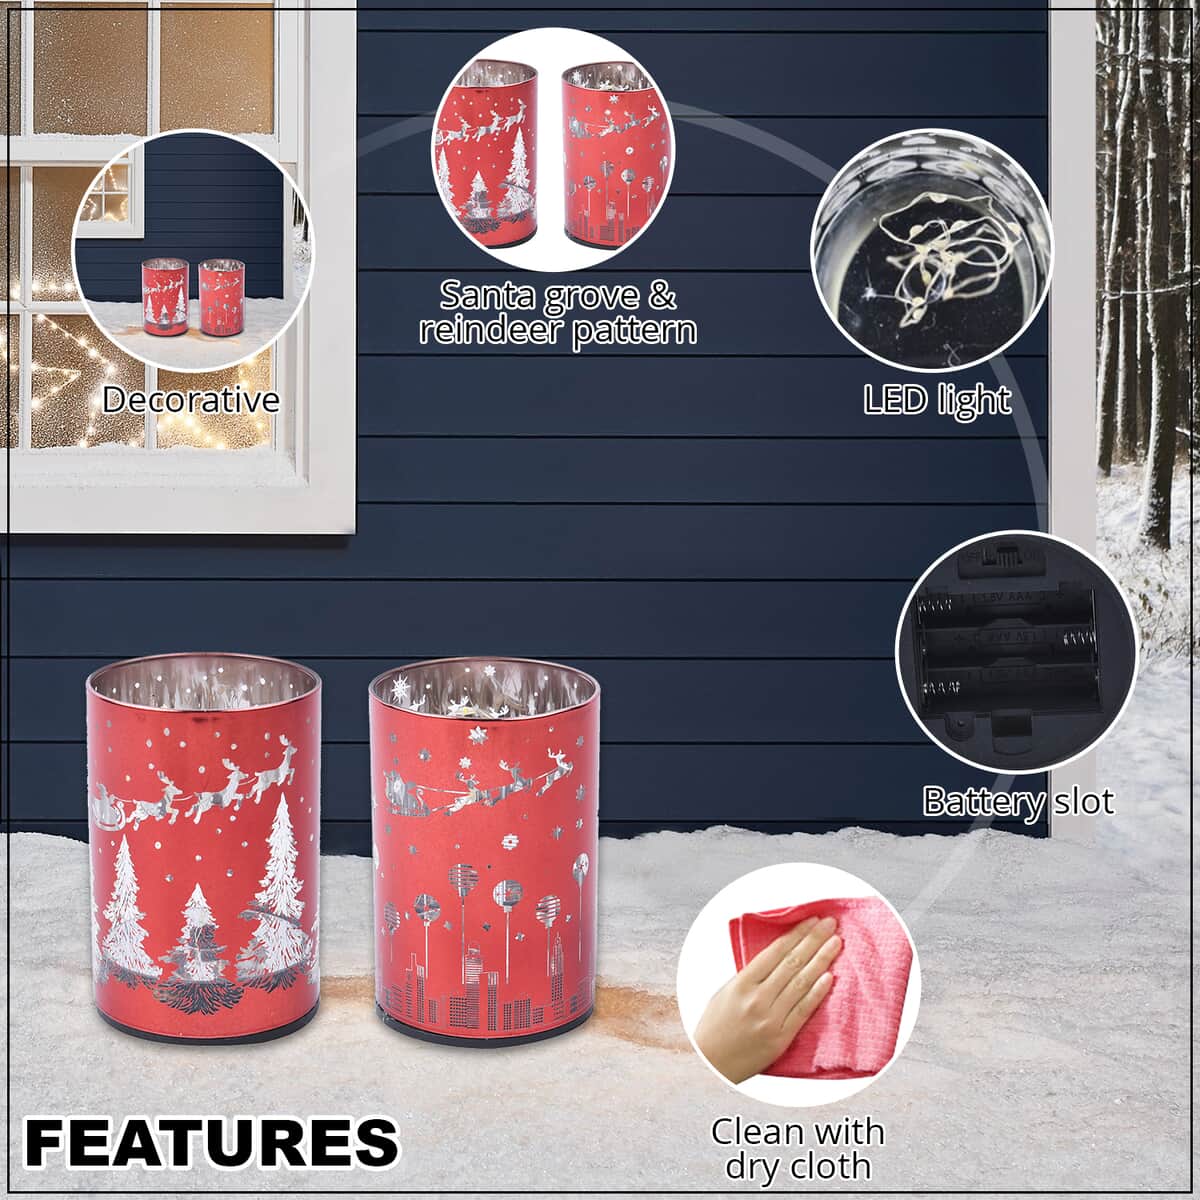 Set of 2 Red Santa Grove & Reindeer Pattern LED Lantern For Christmas Decorations, Festive Lanterns LED Light For Tabletop Home Desk Decor (3xAAA Batteries Not Included) image number 2